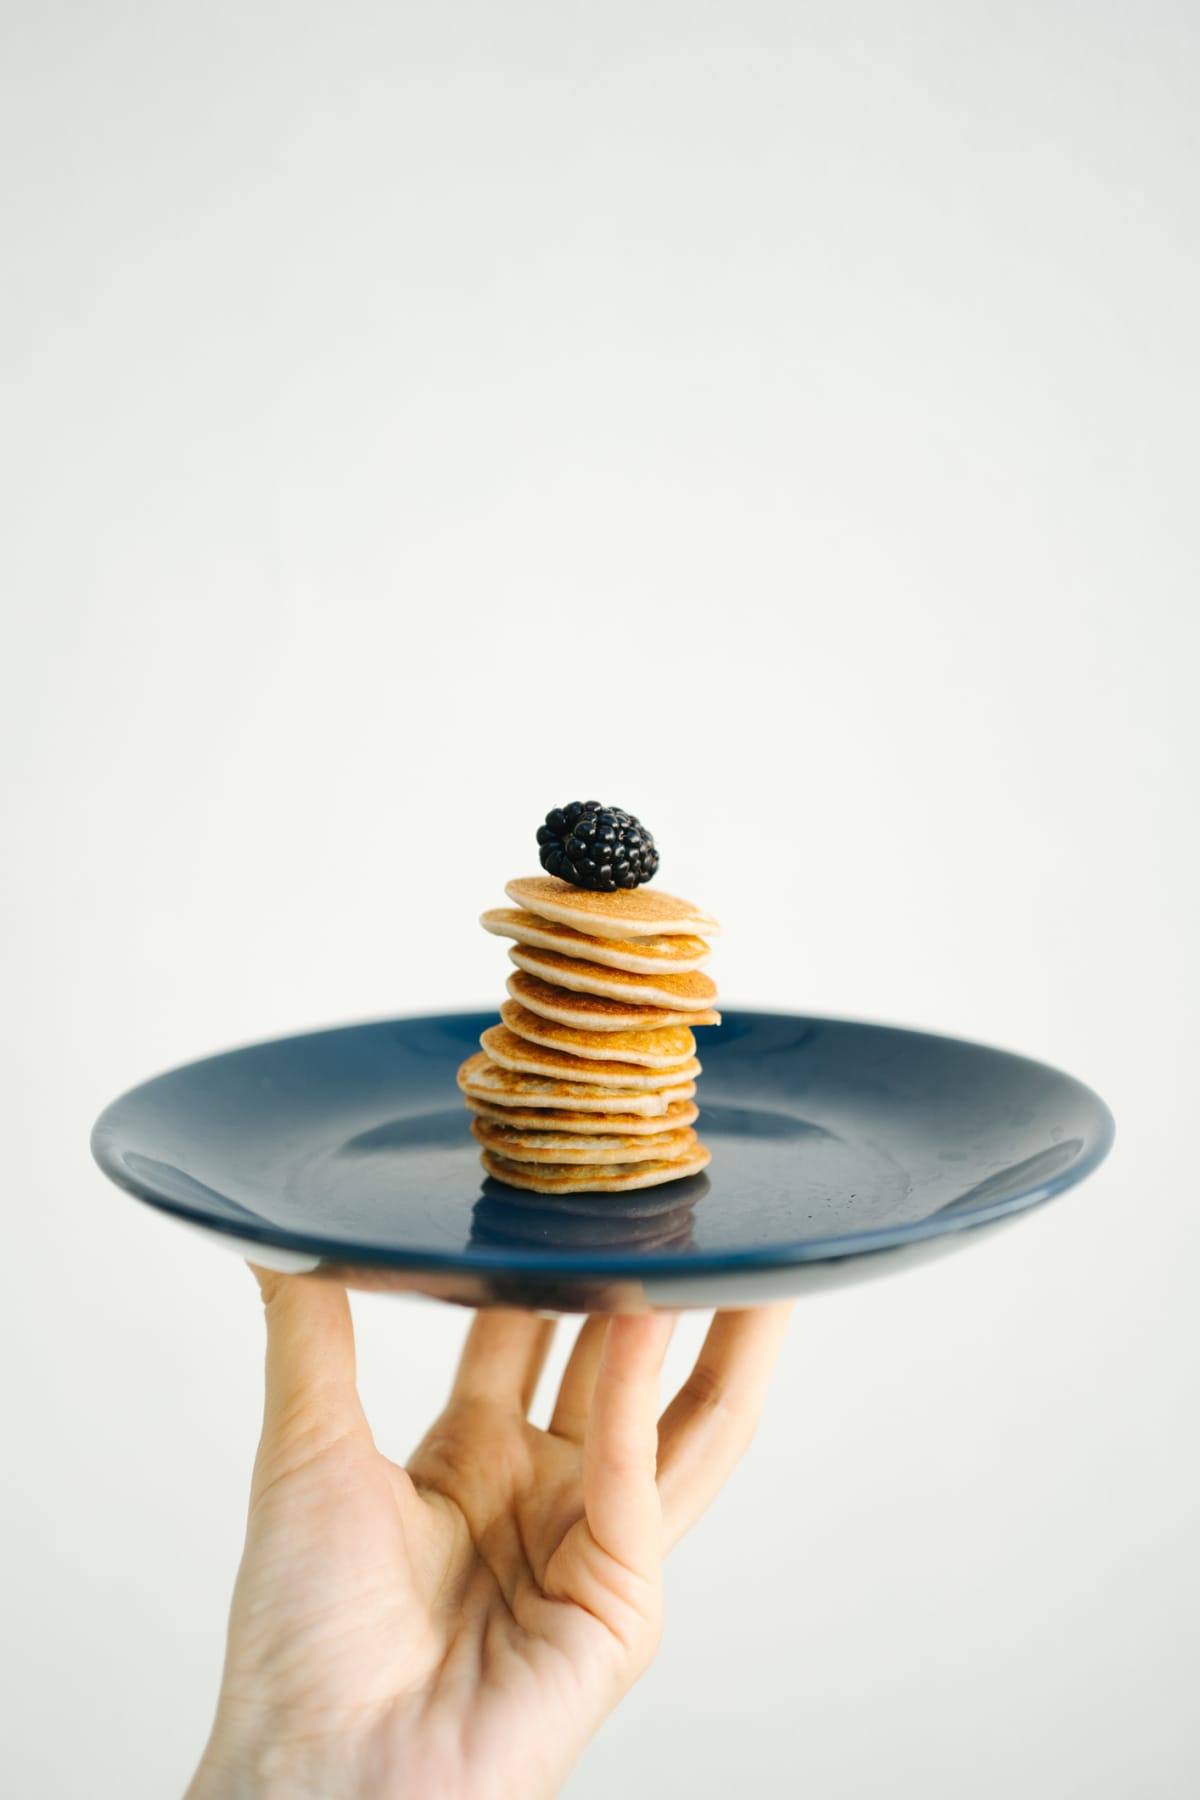 a hand holing a blue plate that has a stack of mini pancakes with a blackberry on top